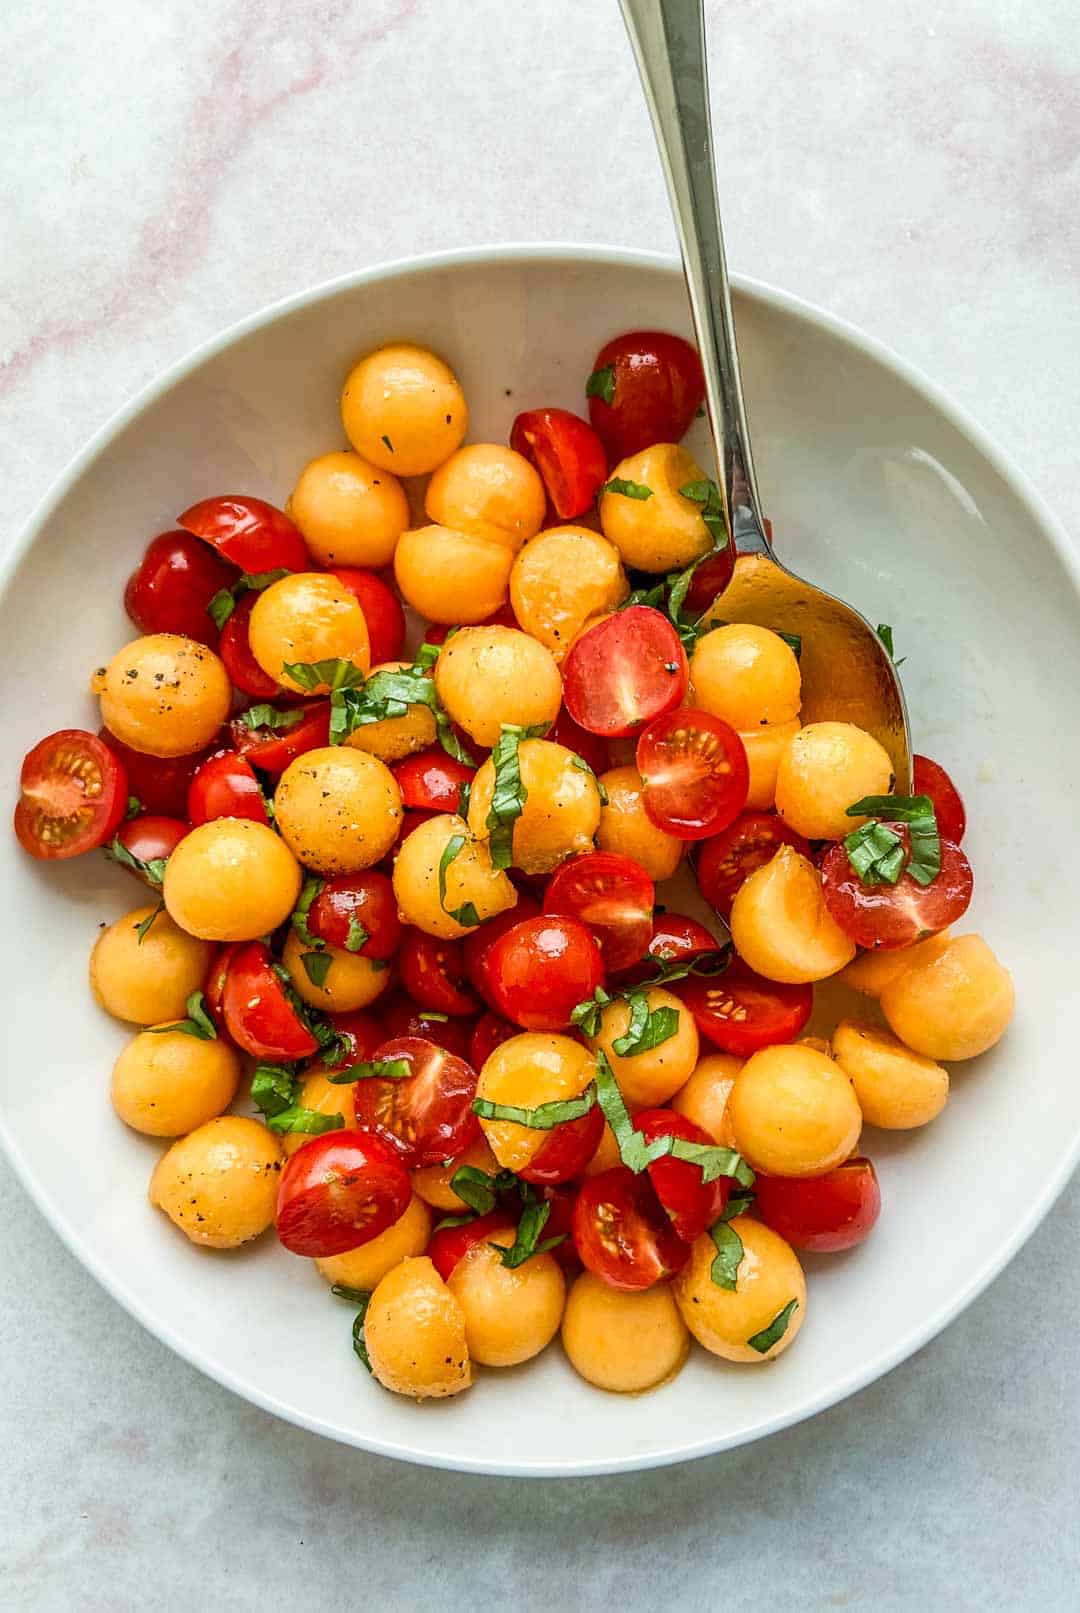 A cherry tomato and cantaloupe salad in a white bowl.